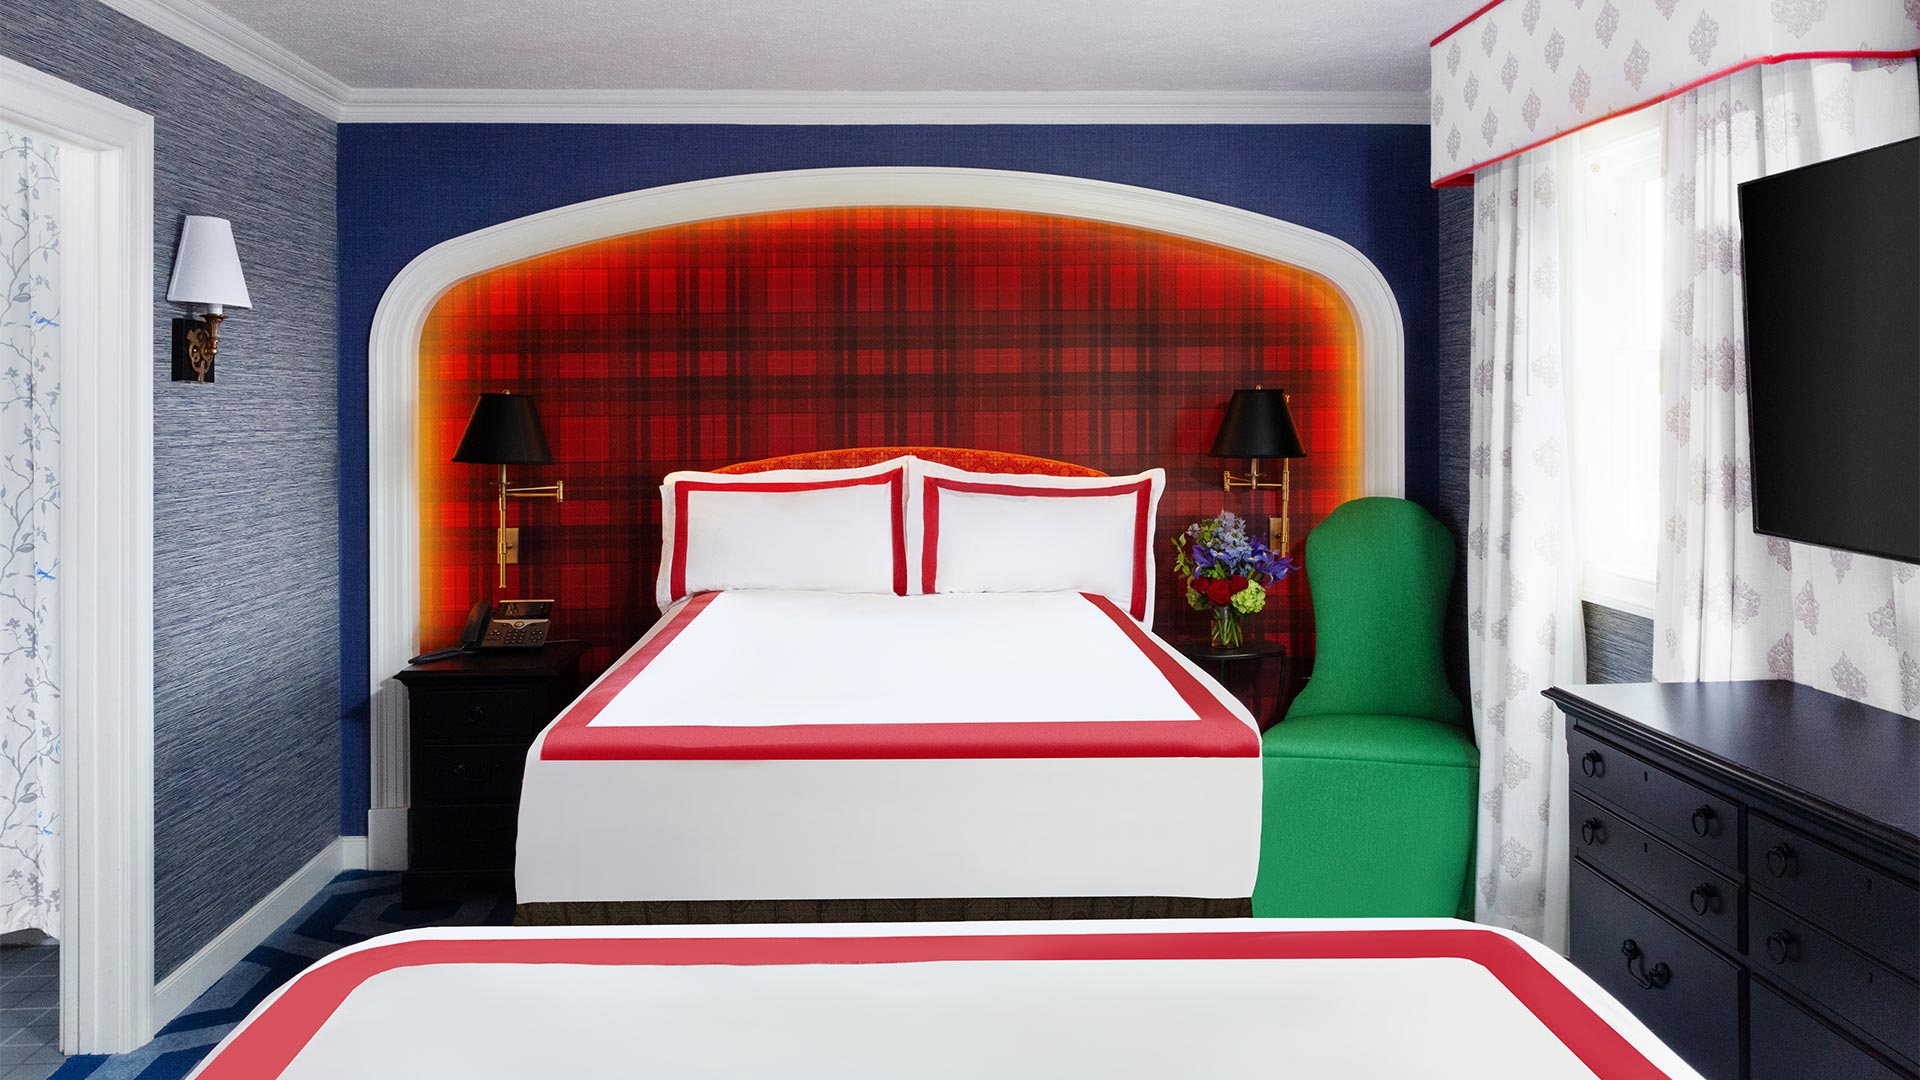 detail shot of a bedroom. The bed has white bedding with bright red piping. There wall behind the bed is a classic buffalo plaid wallpaper. There are blue and green accents throughout the room.